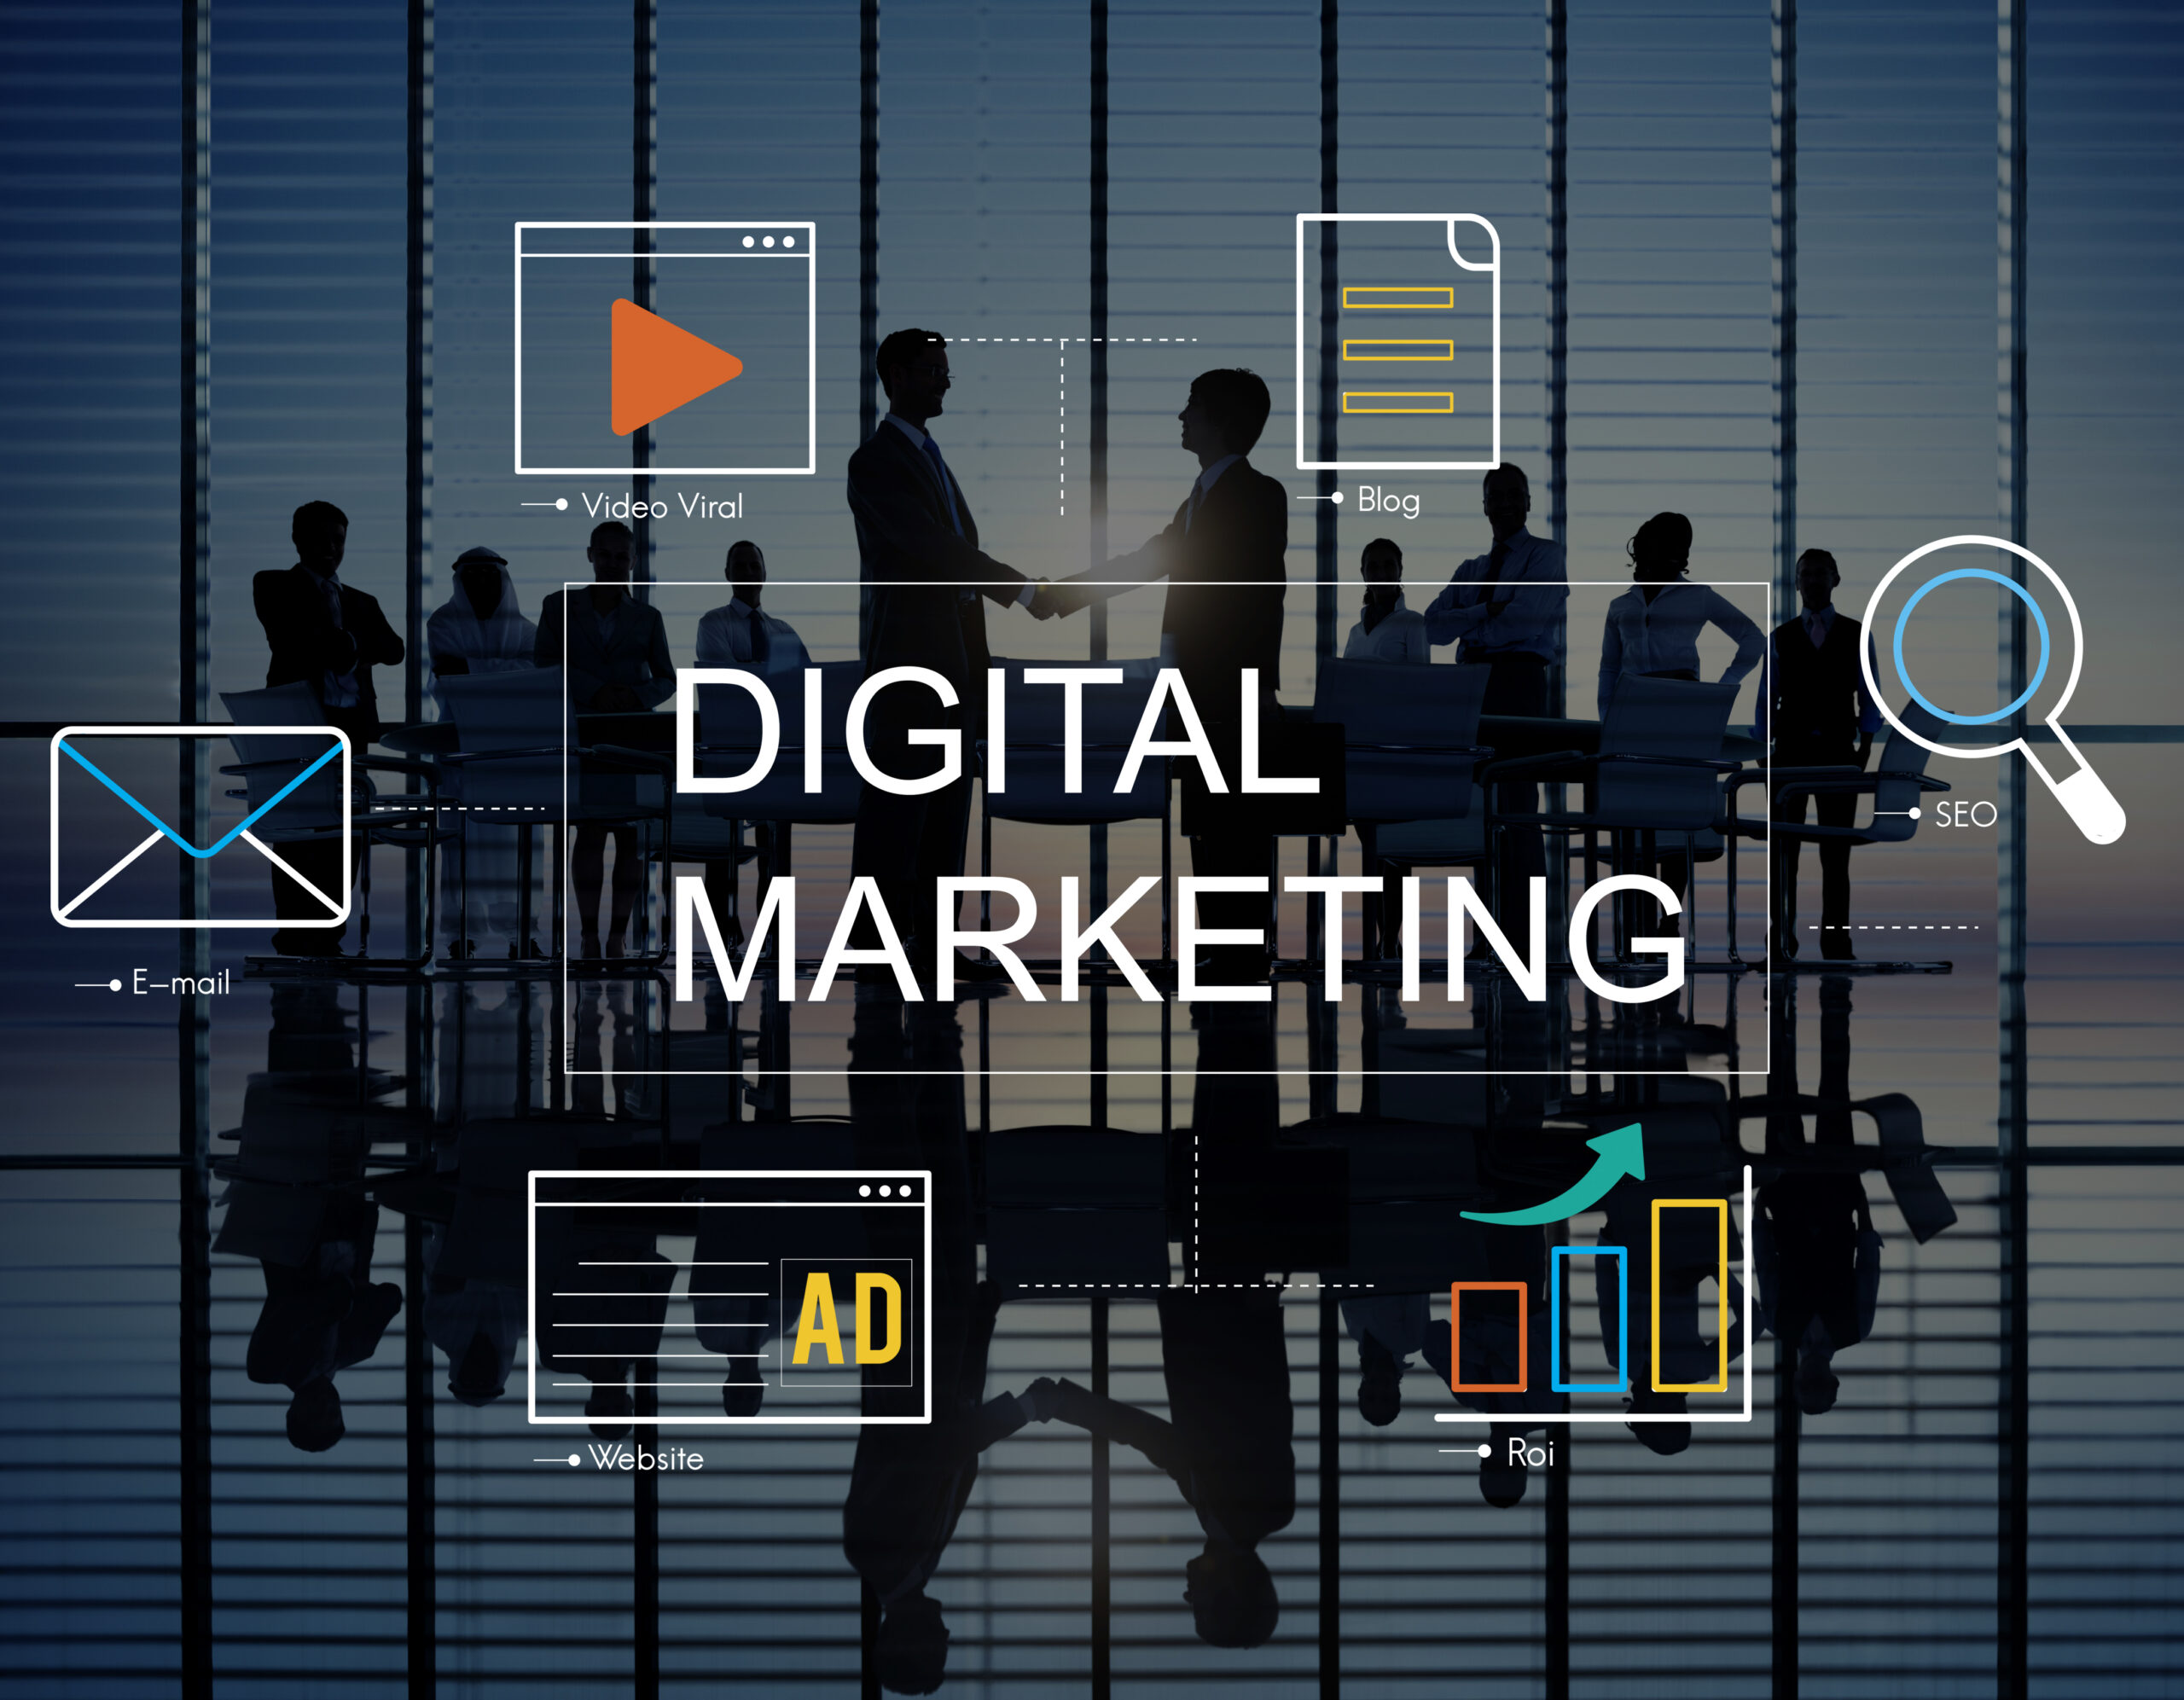 Digital Marketing Services: For Small & Medium Businesses in 2023